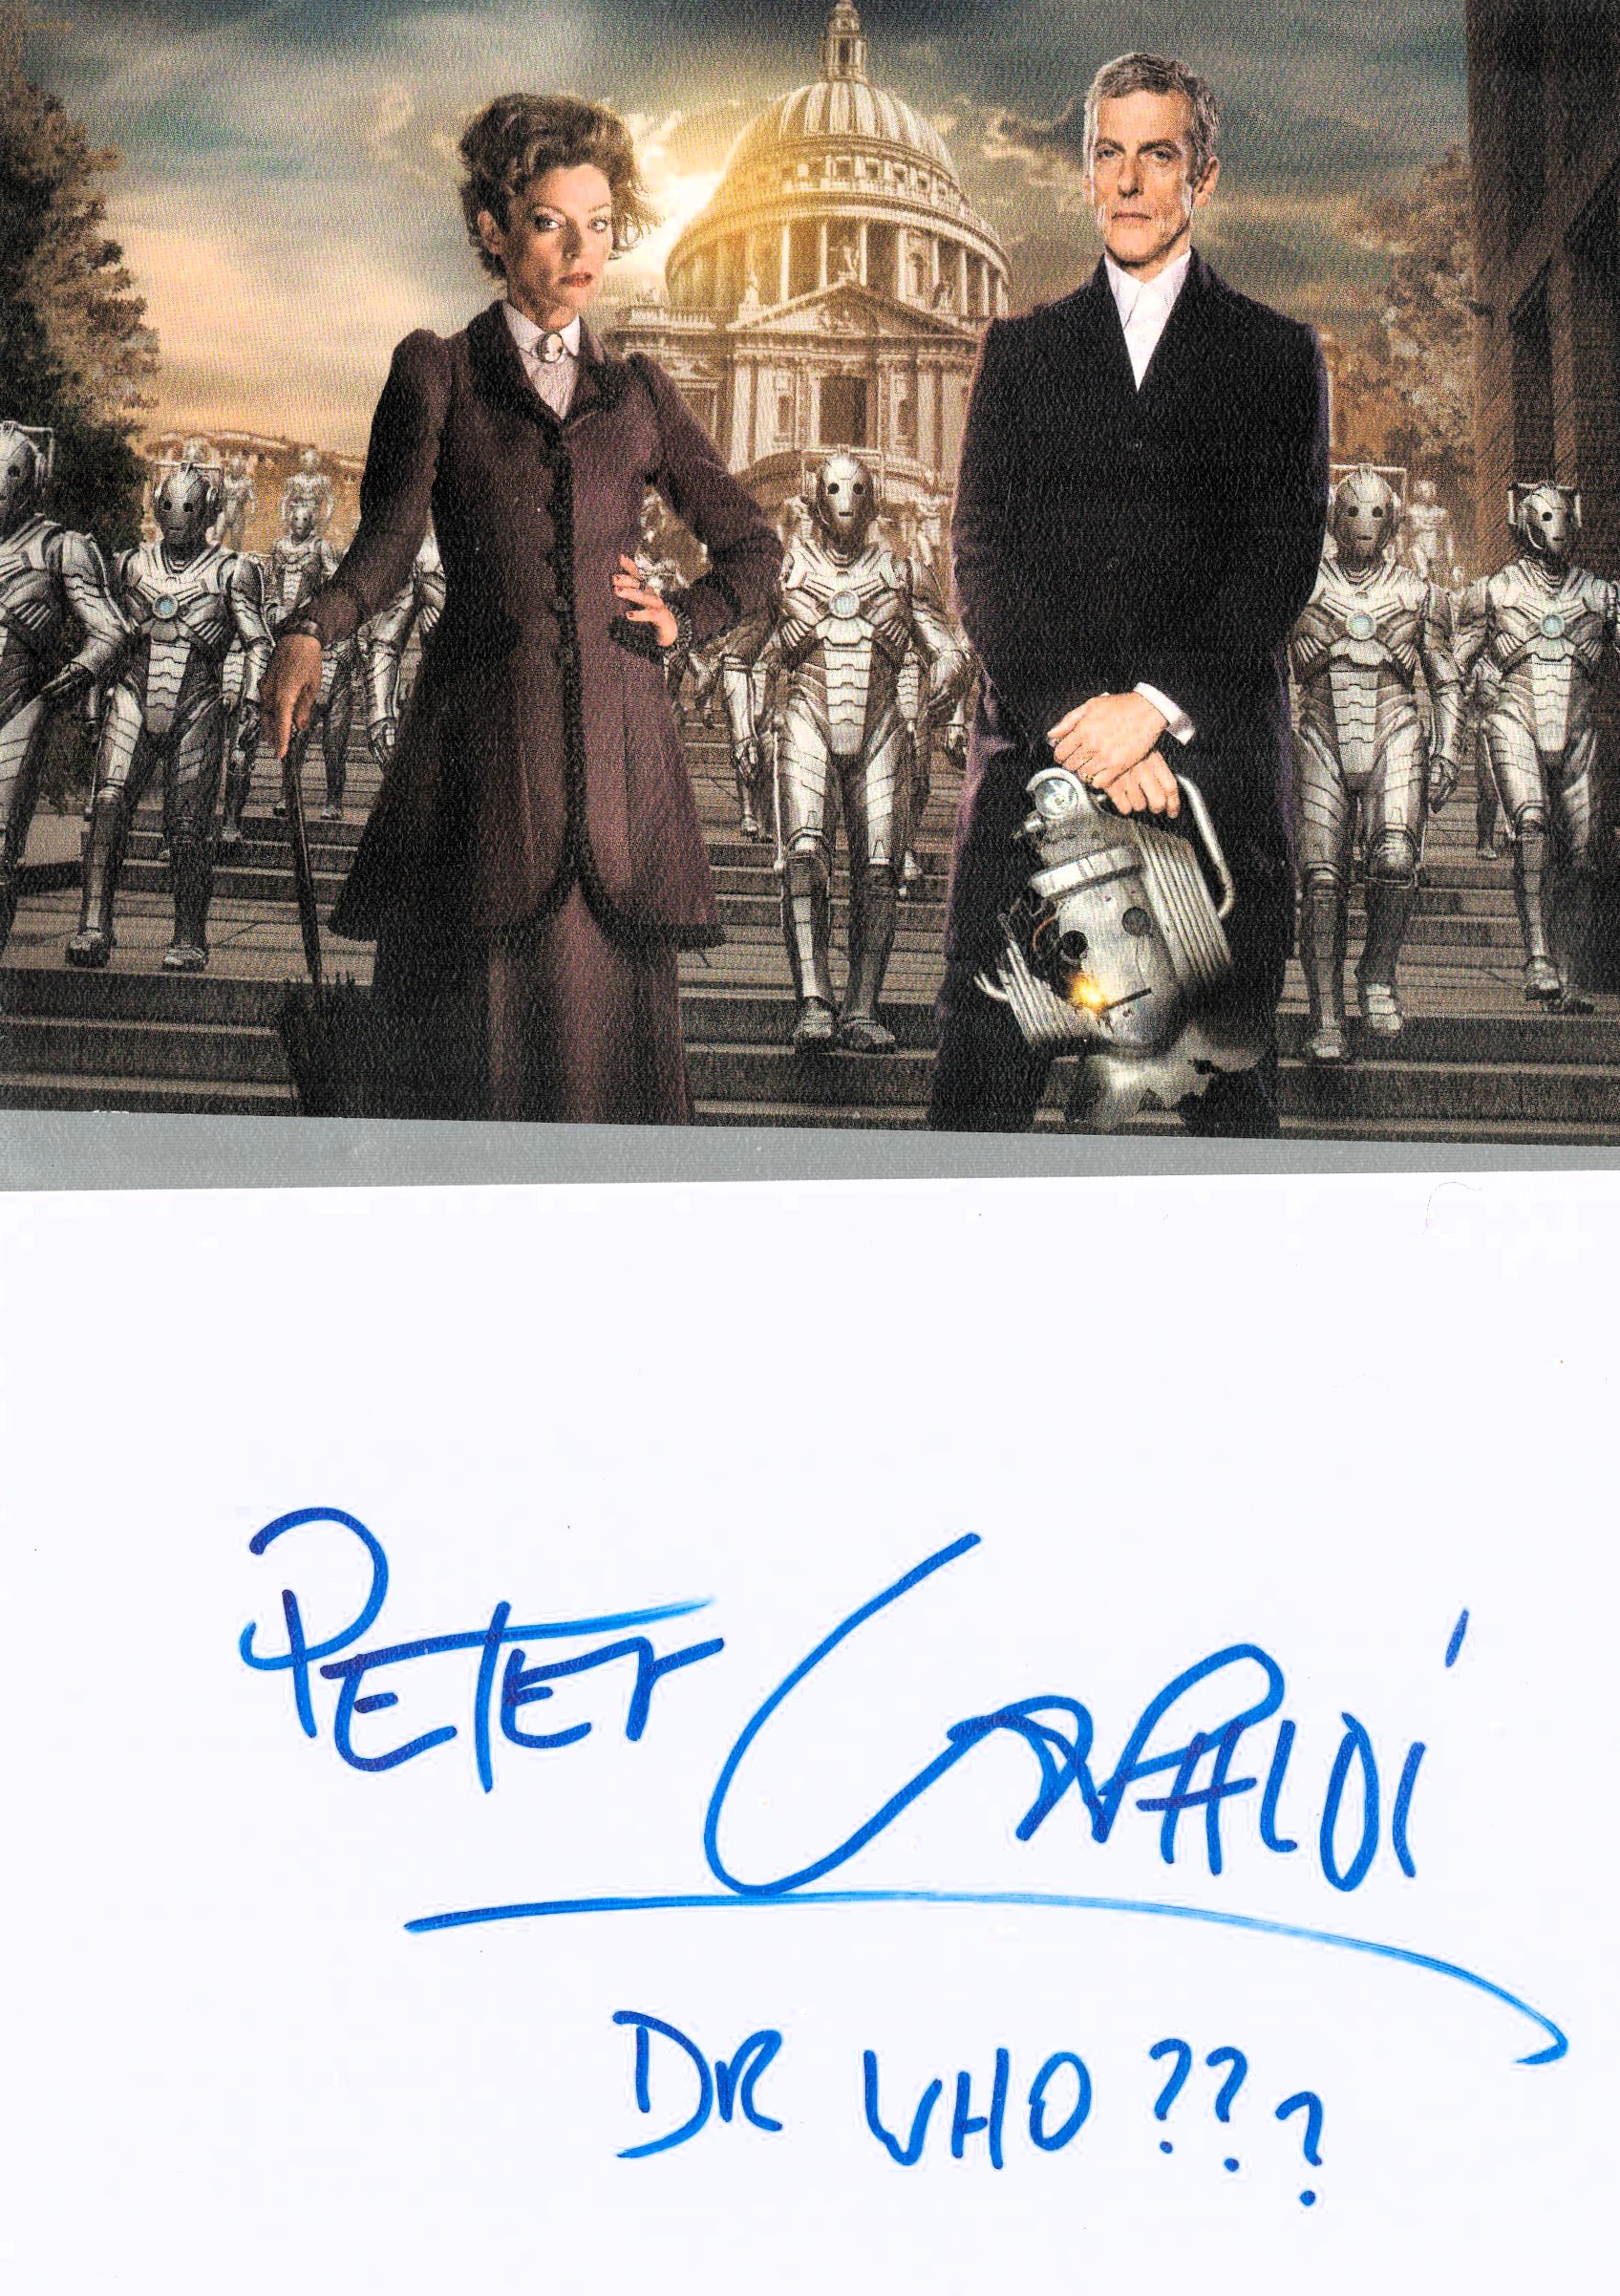 Peter Capaldi signed 6x4 inch white card and 6x4 inch Doctor Who photo. Good condition. All